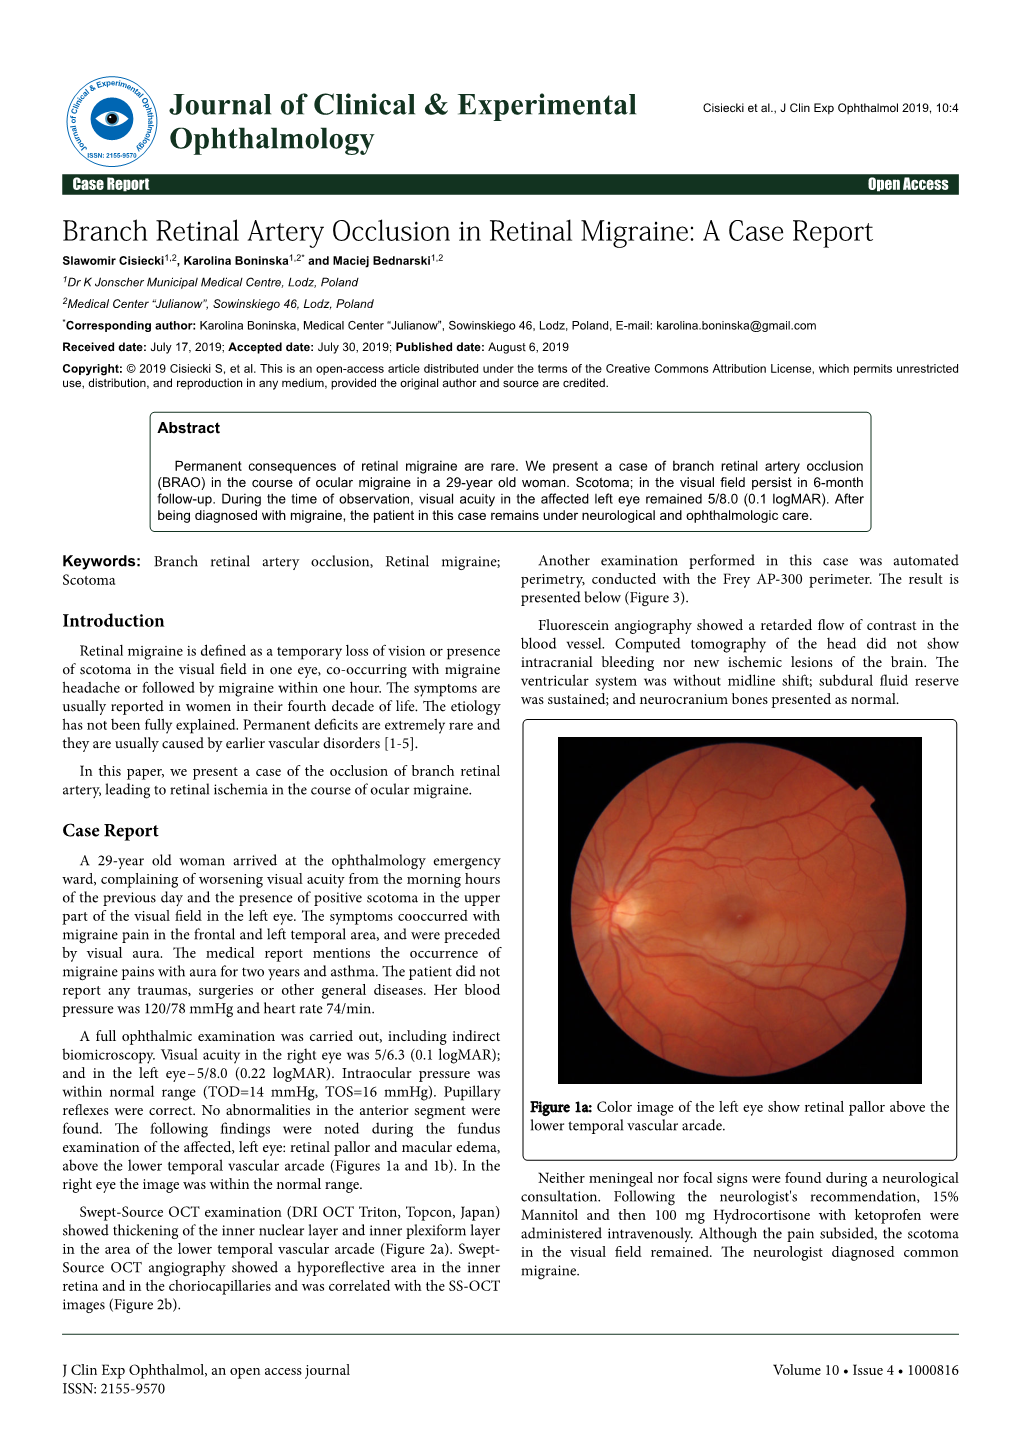 Branch Retinal Artery Occlusion in Retinal